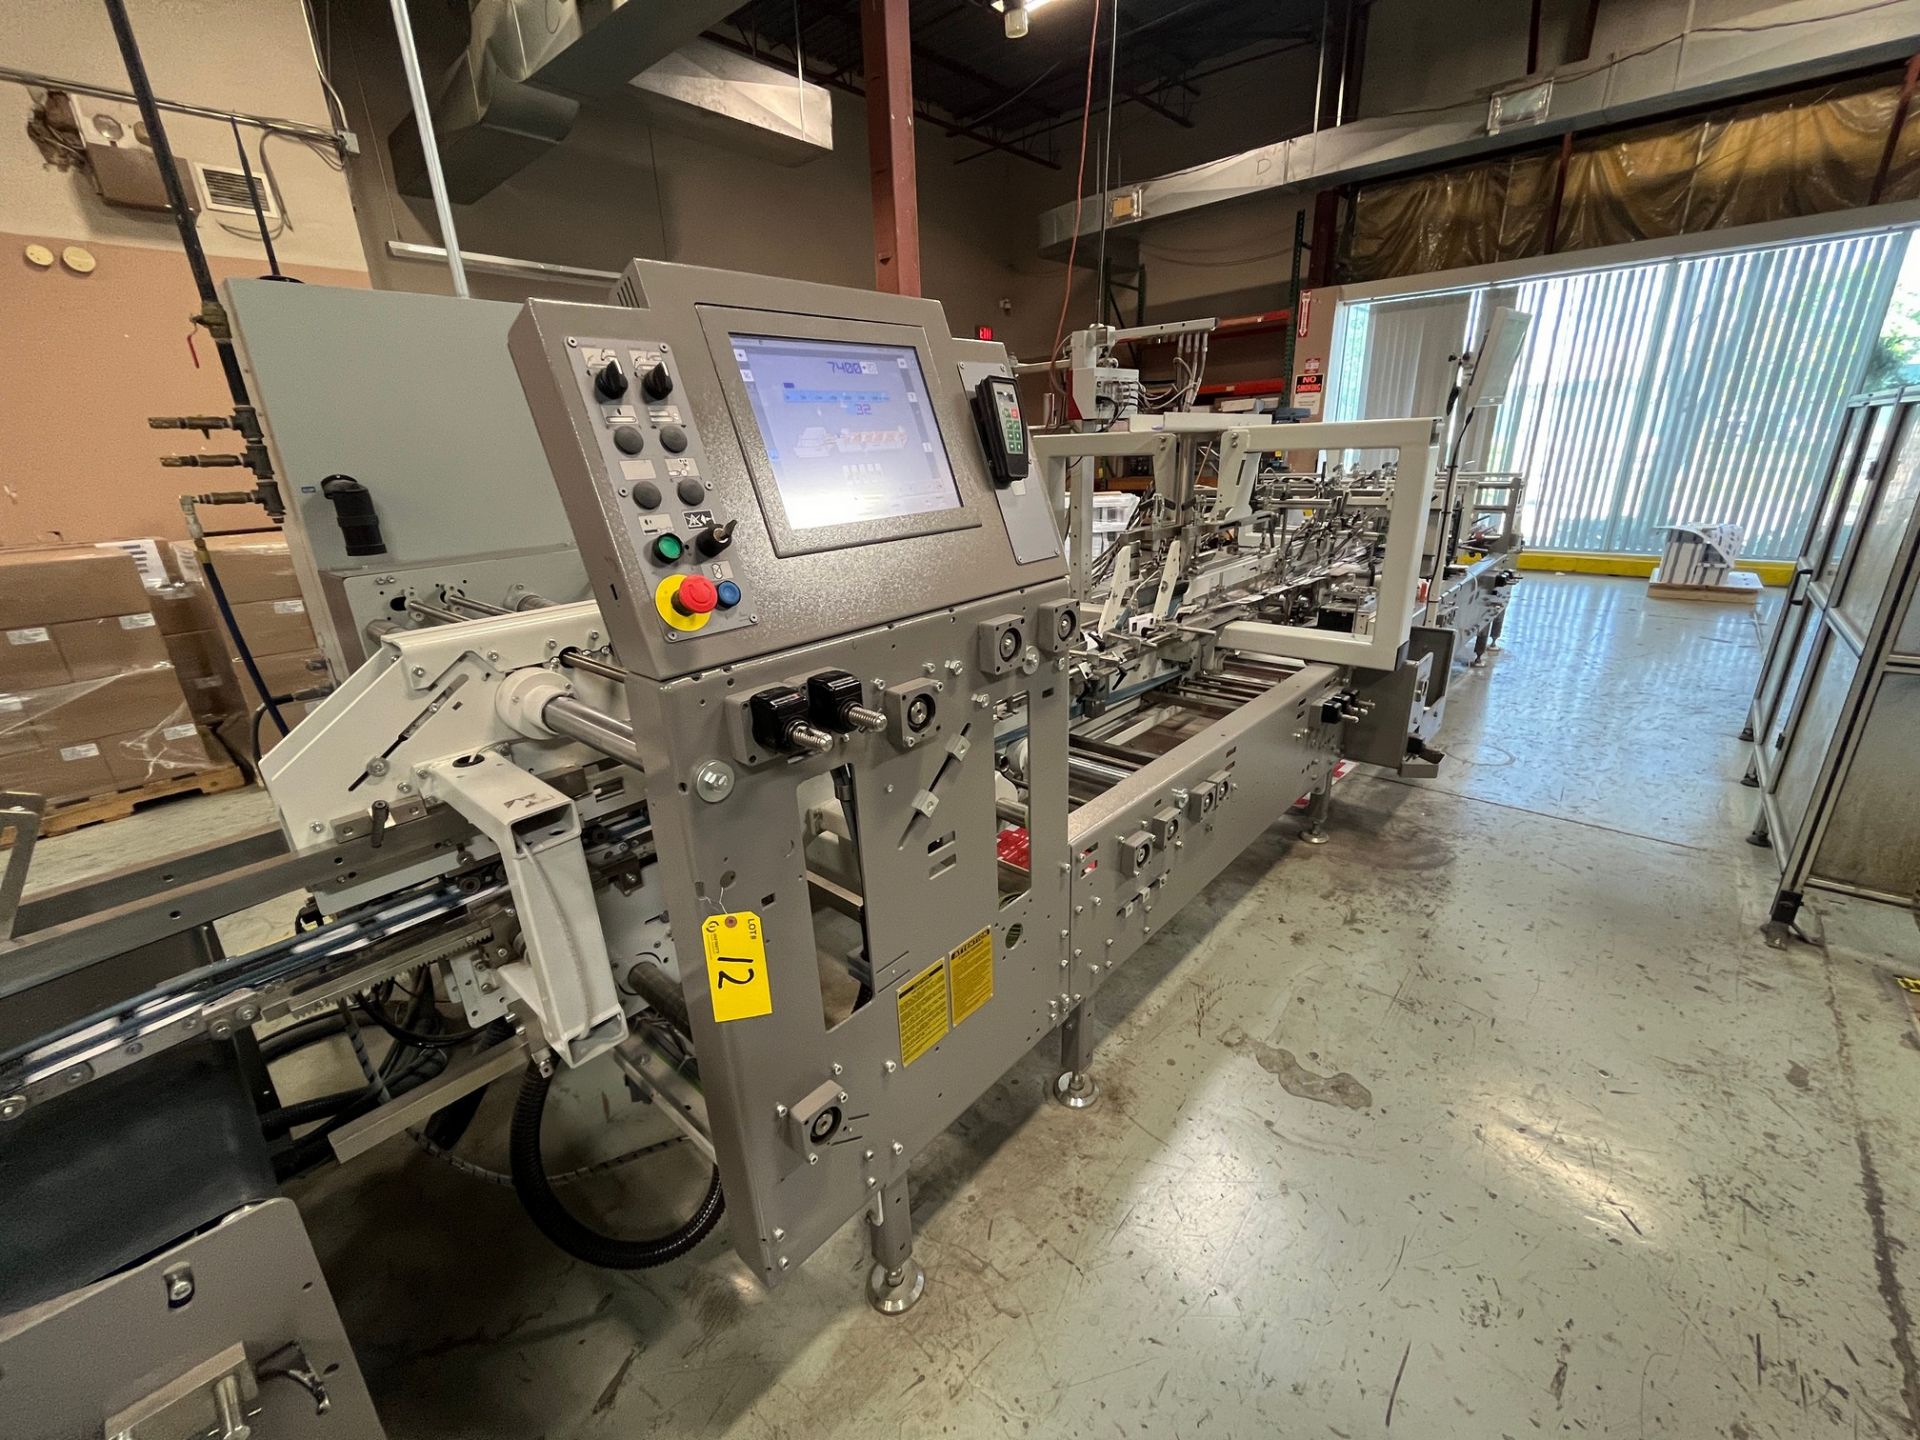 2017 BOBST AMBITION 106 A-1 HI-SPEED STRAIGHT-LINE FOLDING/GLUING LINE WITH HHS 4 CHANNEL GLUE